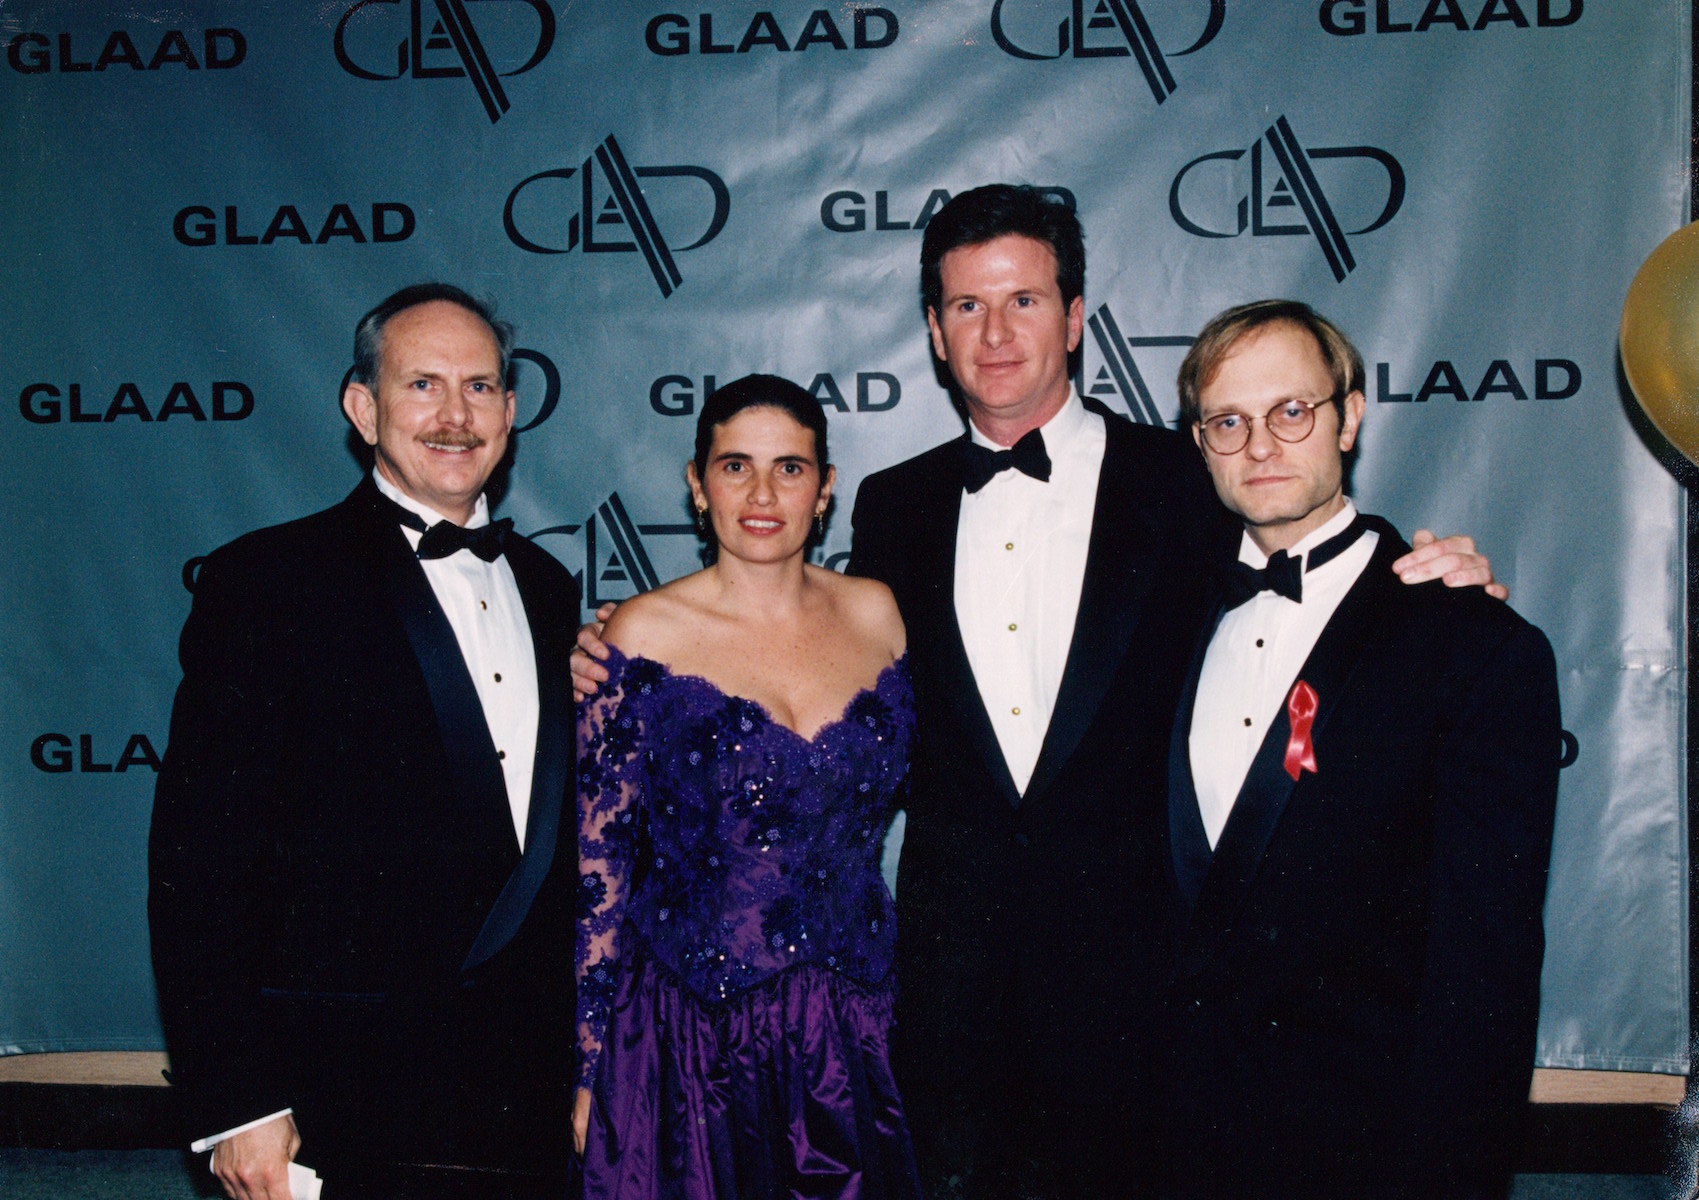 William Waybourn, Waybourn, Jehan Agrama, Michael Keegan, and Niles Hyde Pierce at the GLAAD Awards Dinner, Los Angeles, CA, circa 1996. William shares, “As head of GLAAD, I hired a professional producer for the dinner and it raised more than $1 million.” Photo courtesy of William Waybourn.